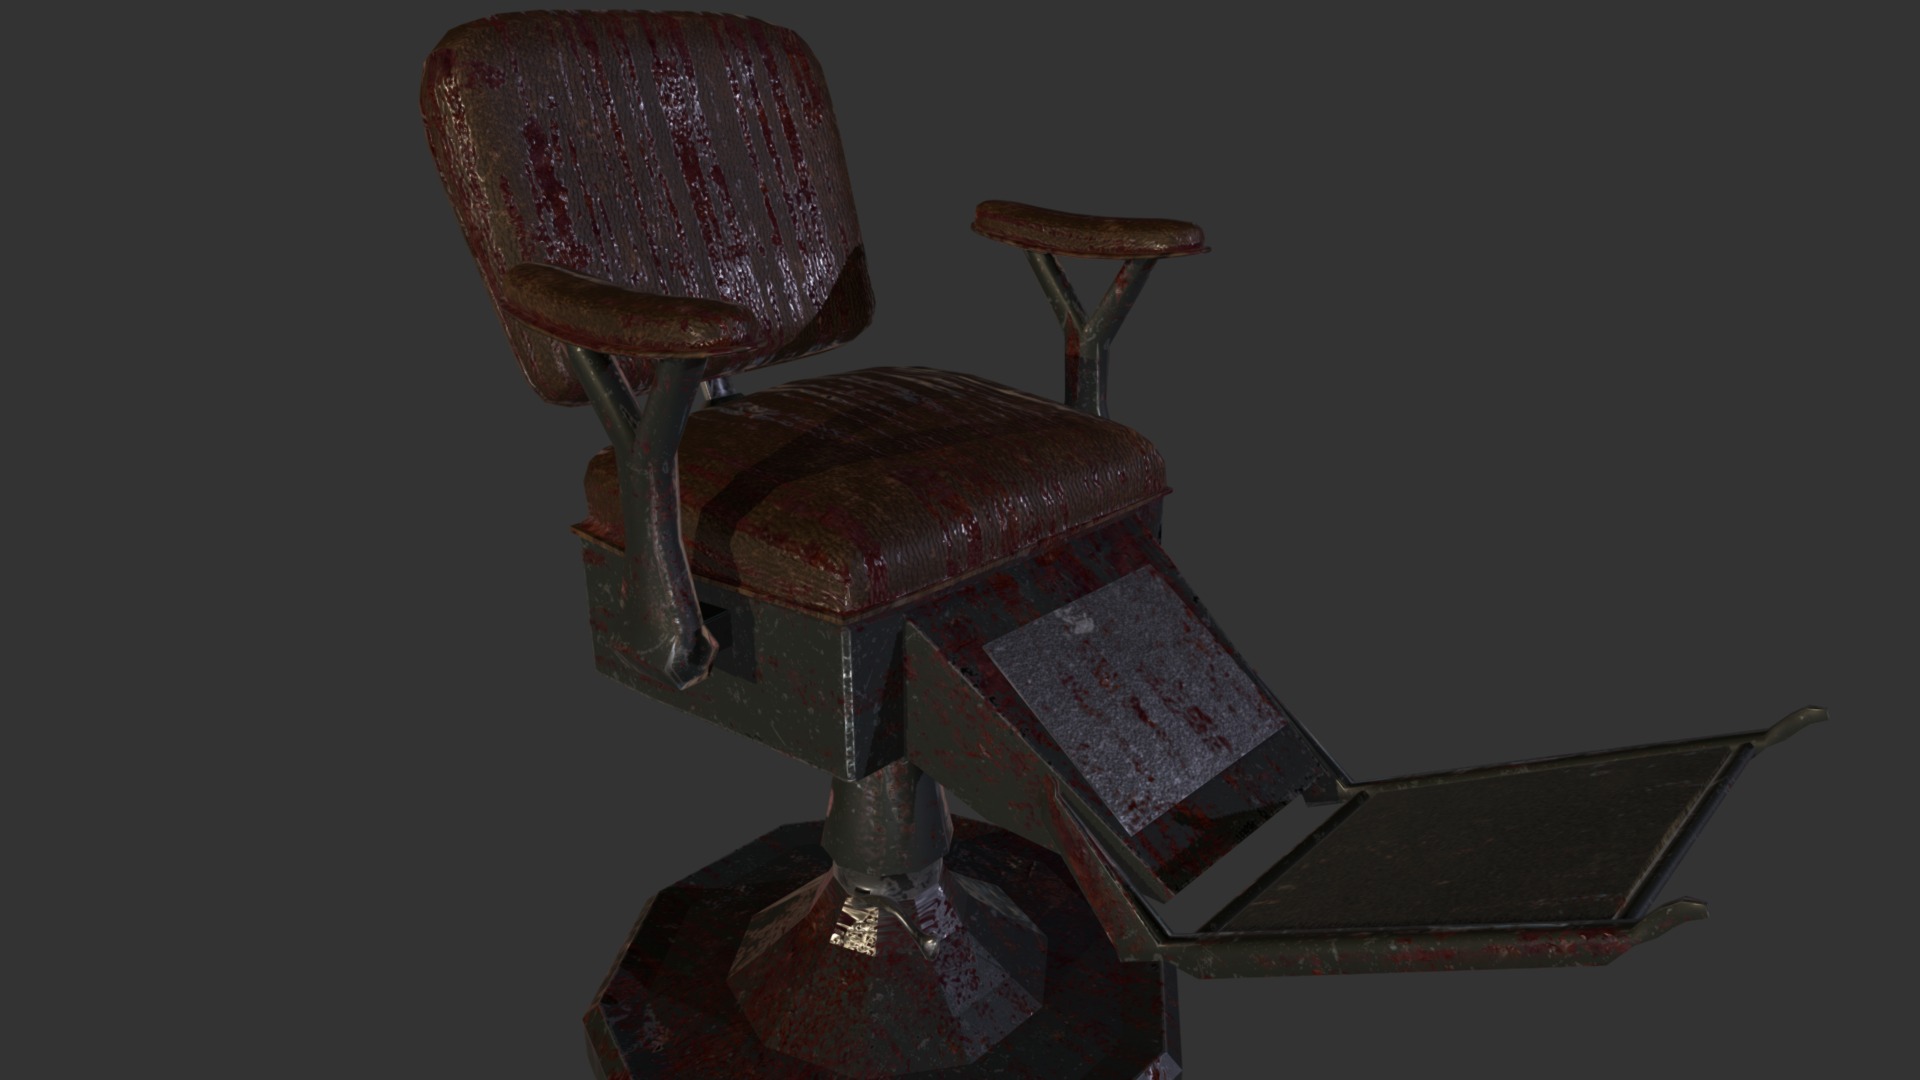 “Do not hesitate, my friends. Come and play on the Chair of Fun”

Dr. Maddinson, Waldrich’s Psychiatric Hospital - Bloody Torture Chair - 3D model by Warrior Game Studios (@warriorgamestudios) 3d model